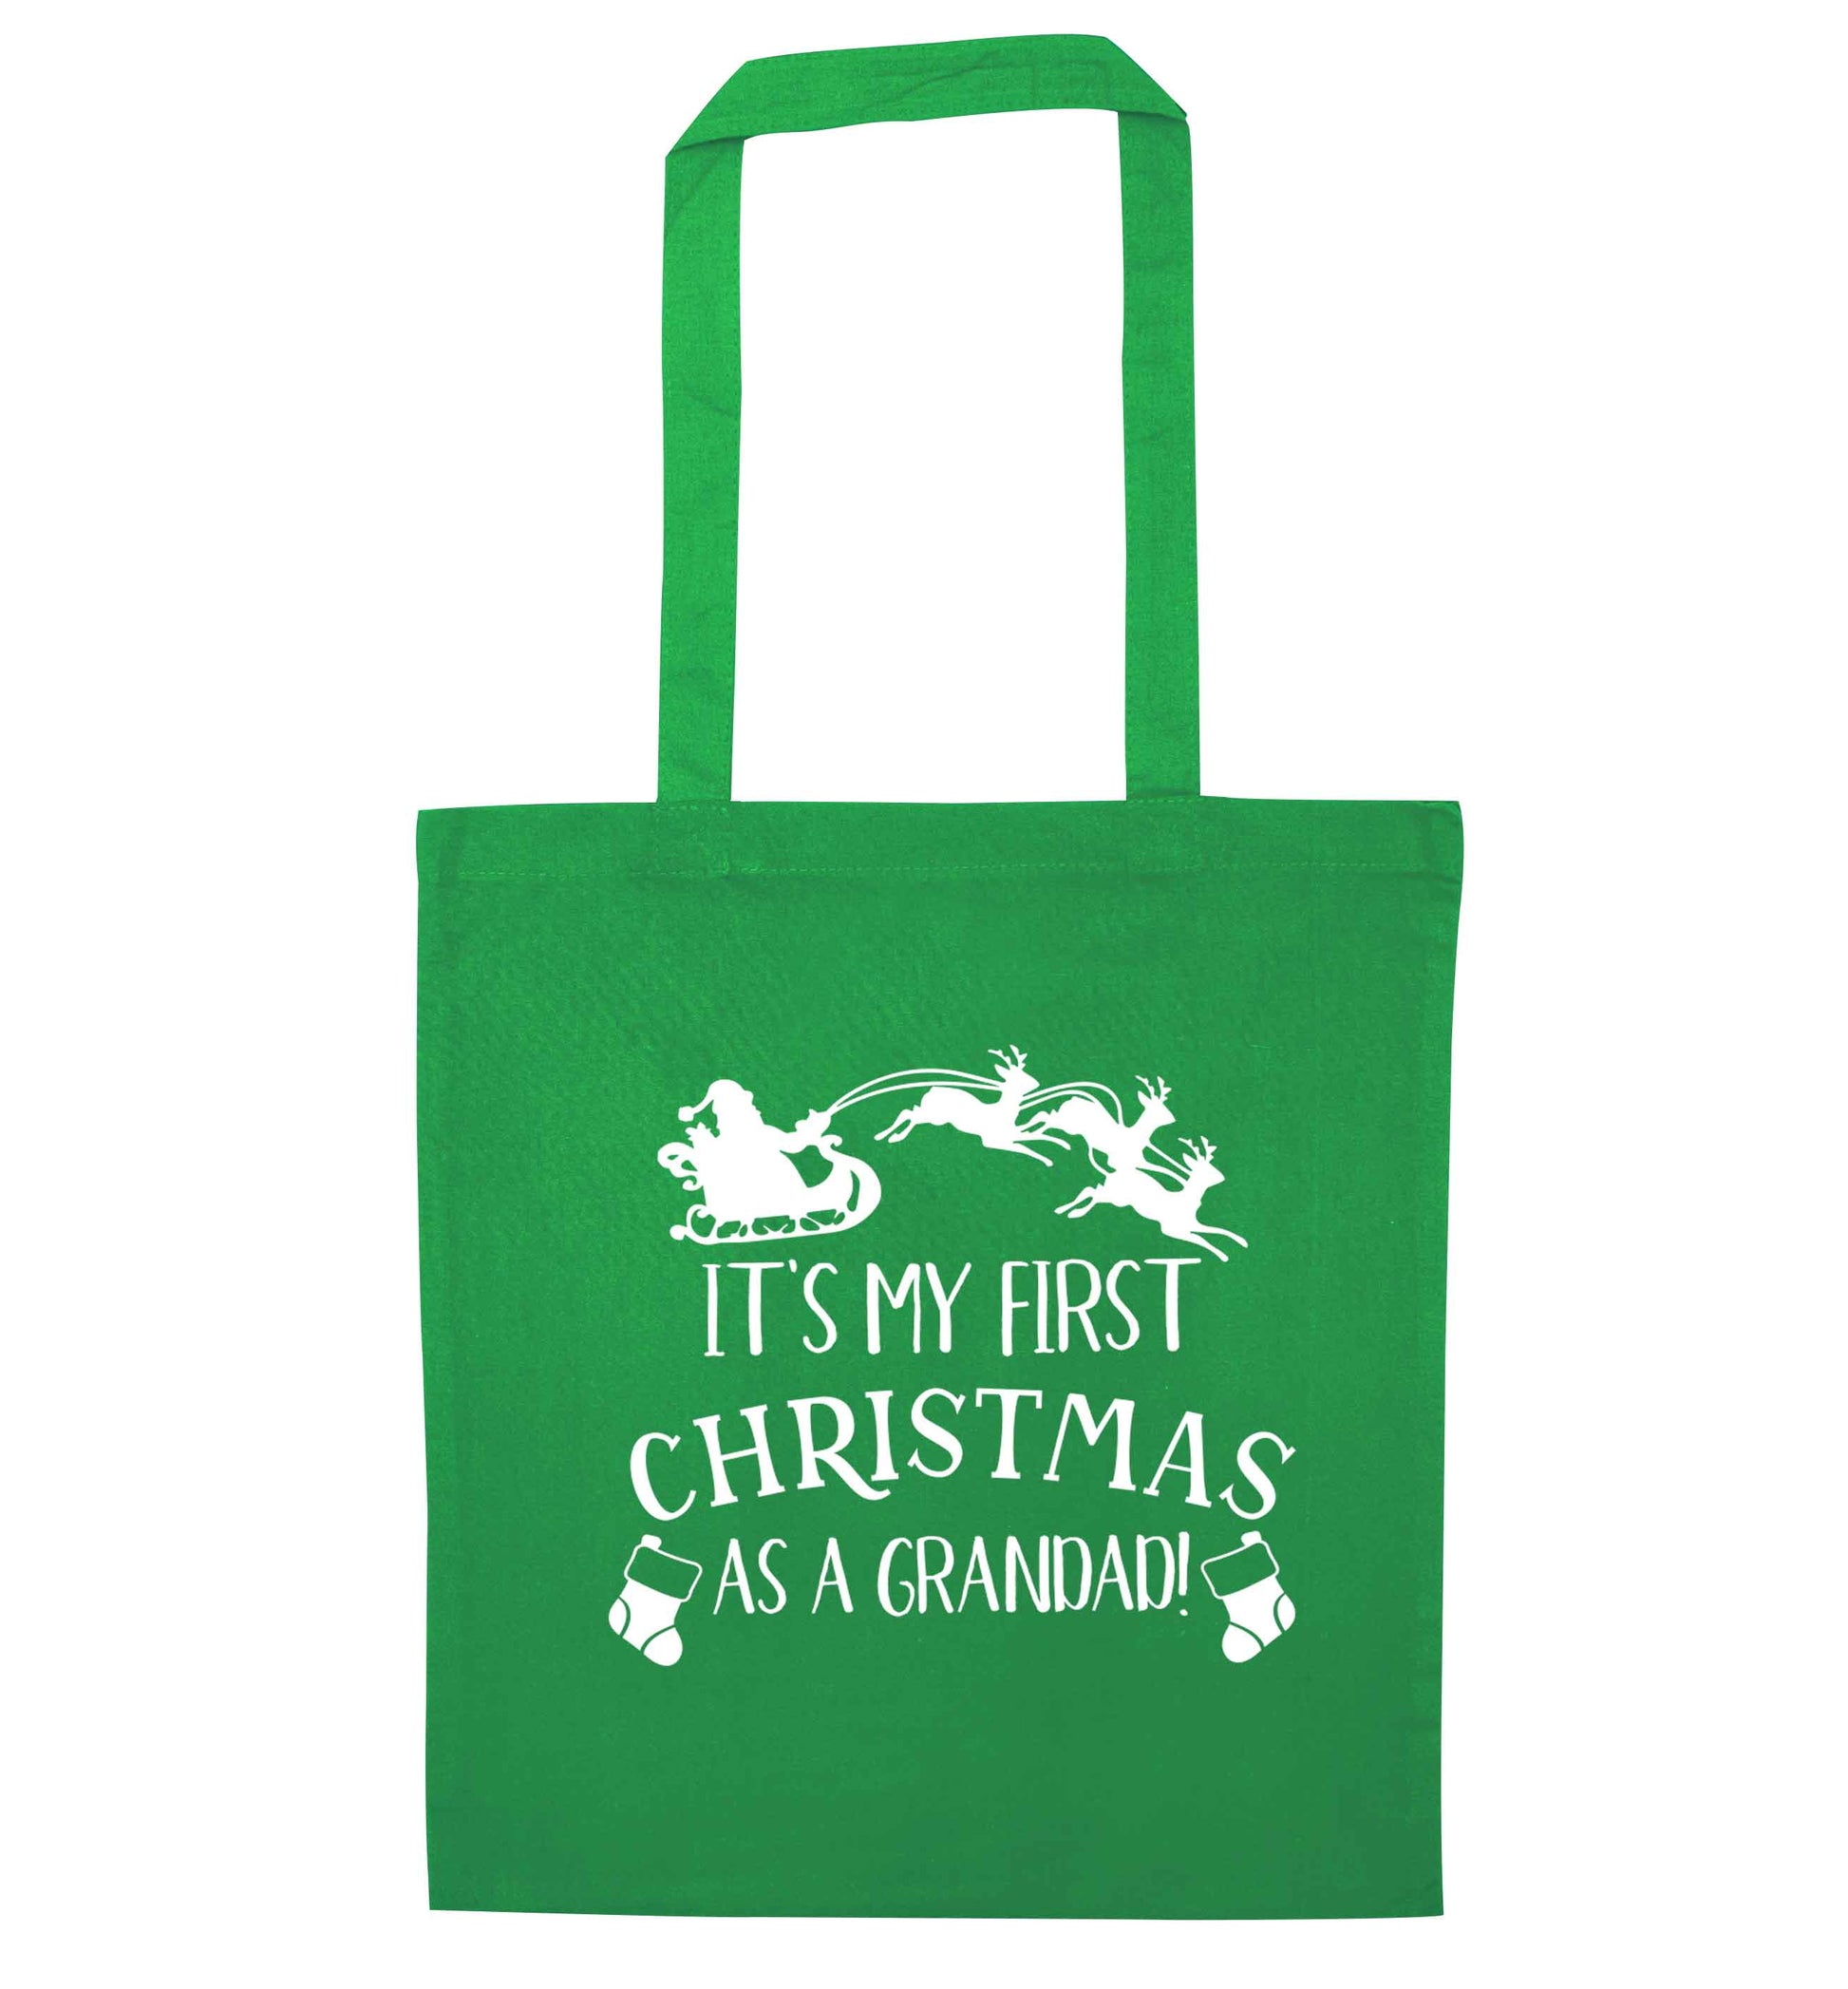 It's my first Christmas as a grandad! green tote bag